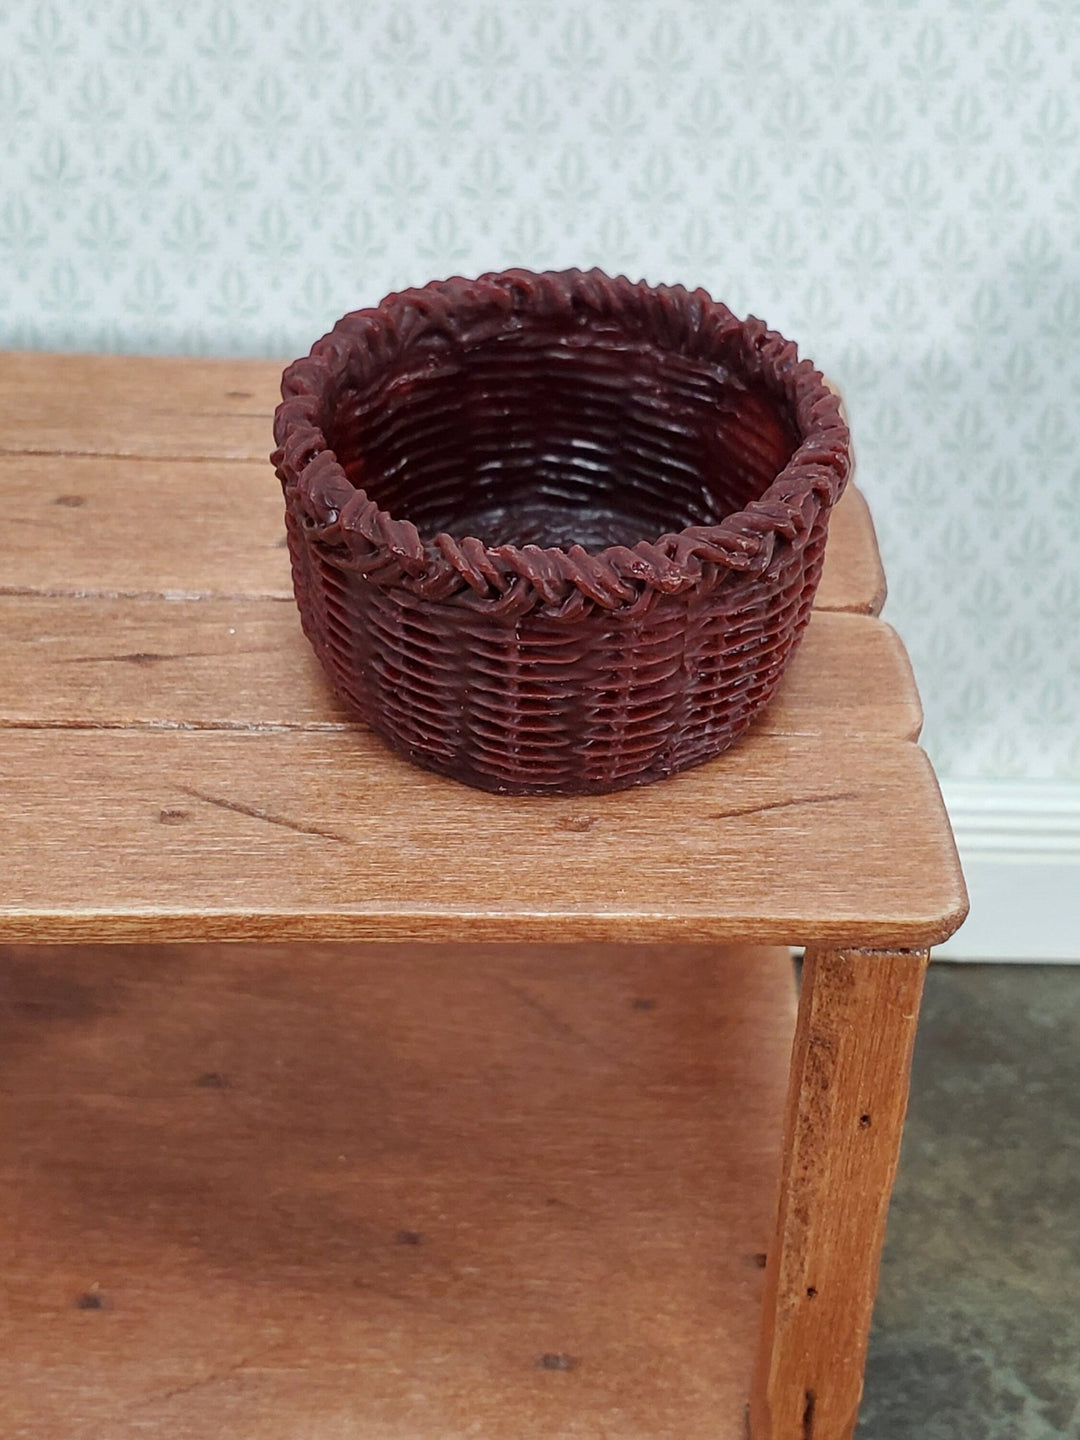 Dollhouse Basket Large Round Brown Detailed 1:12 Scale Miniature - Miniature Crush